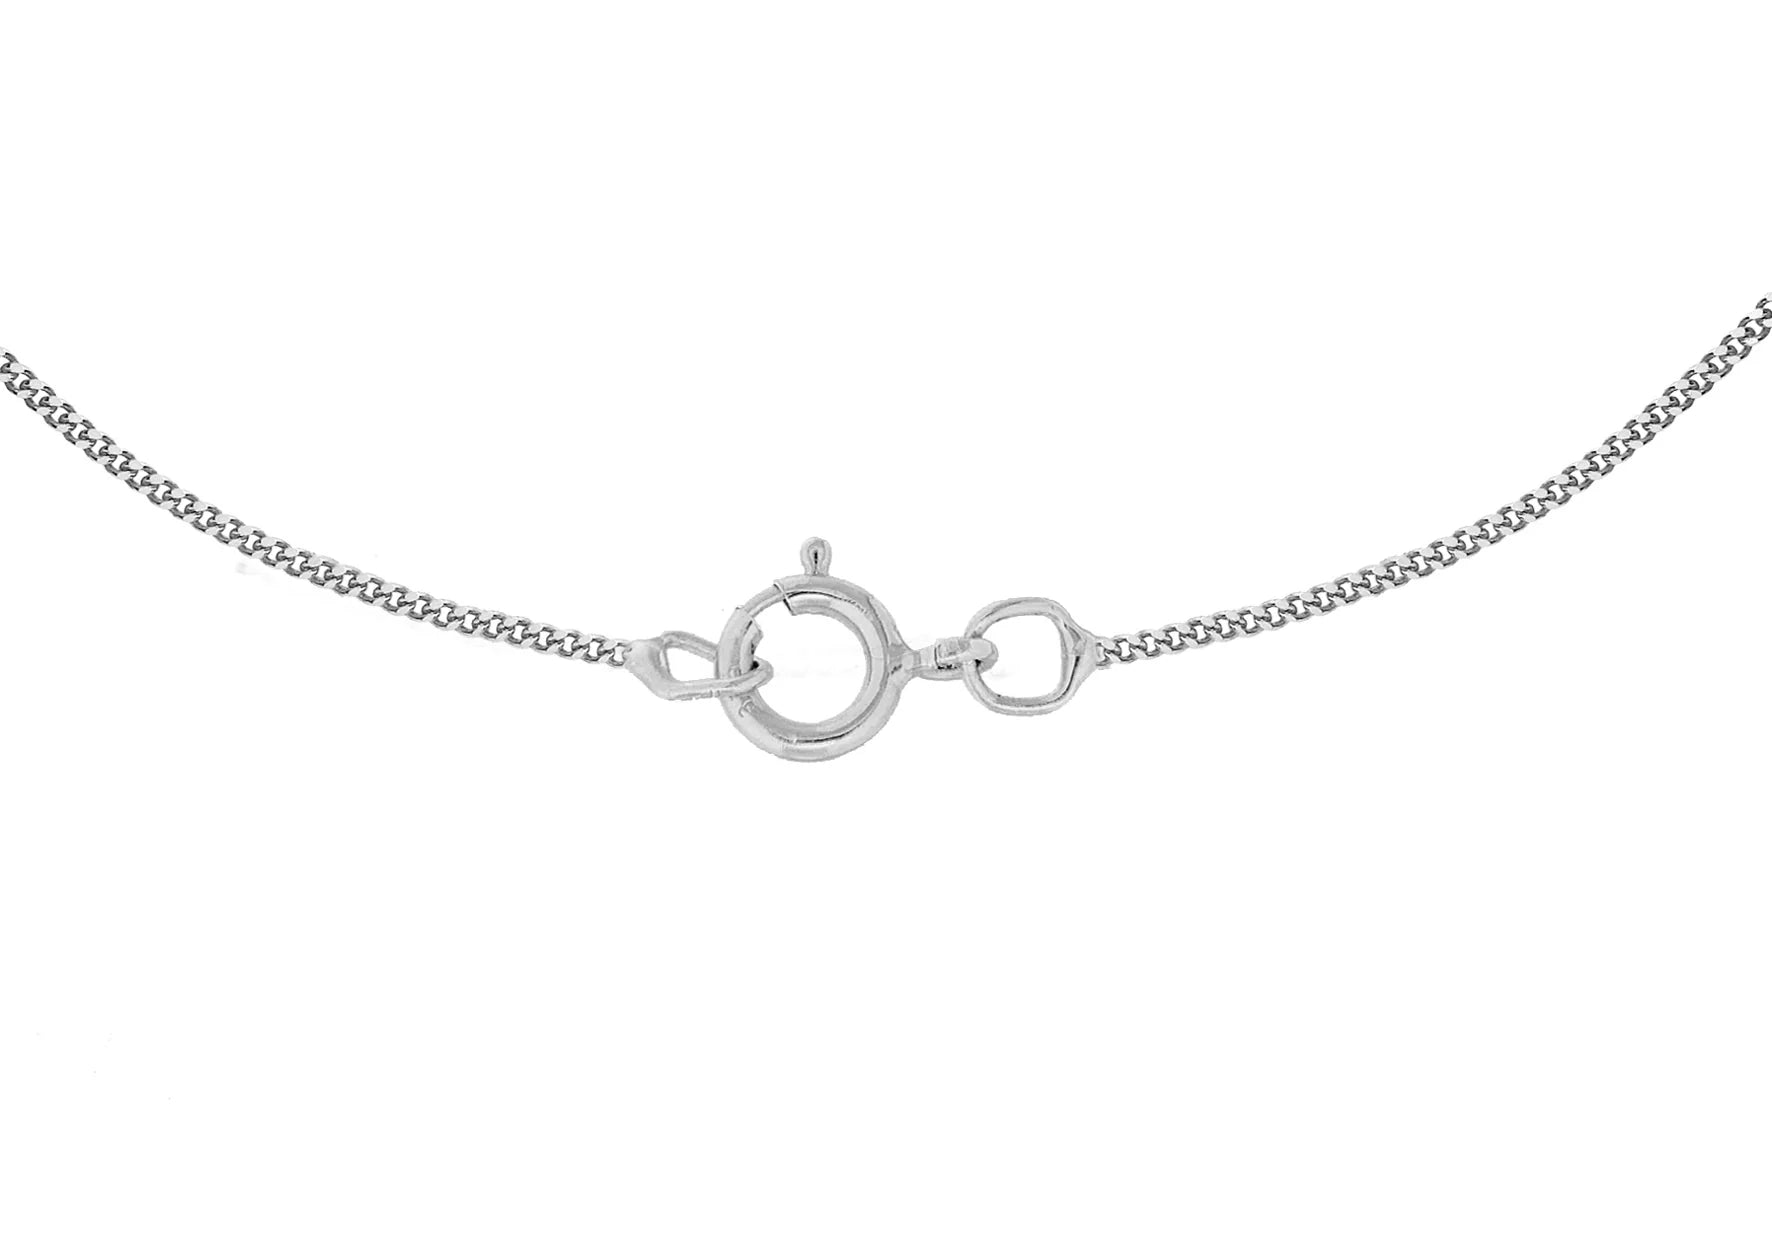 9ct White Gold Adjustable Curb Chain